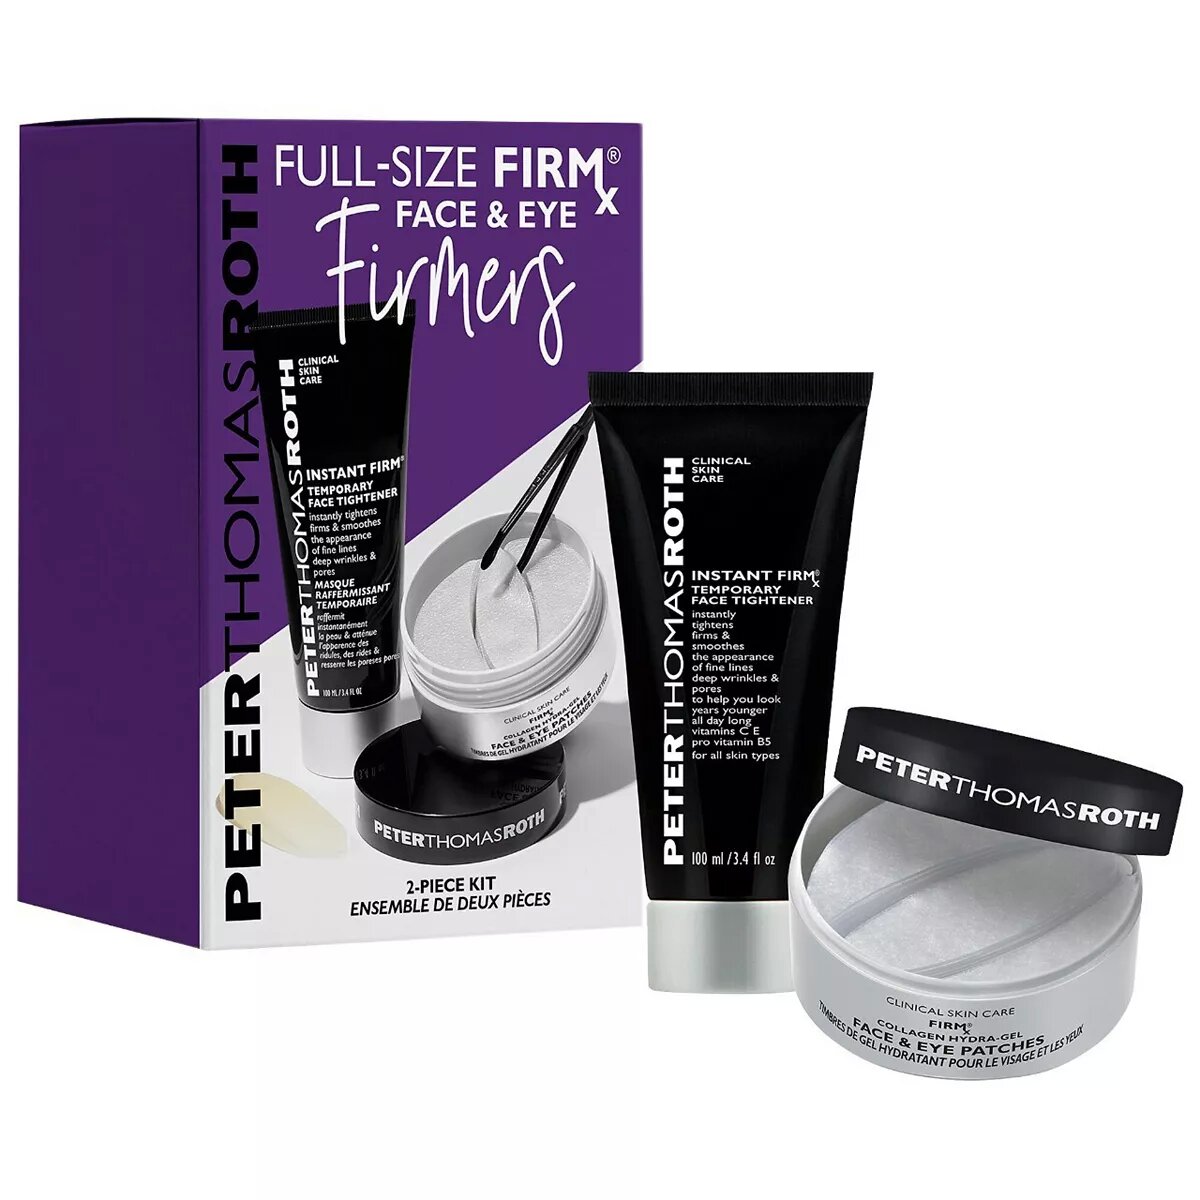 Peter Thomas Roth Full-Size FirmX Face and Eye Firmers 2-piece Kit - New , Sealed, in the Box